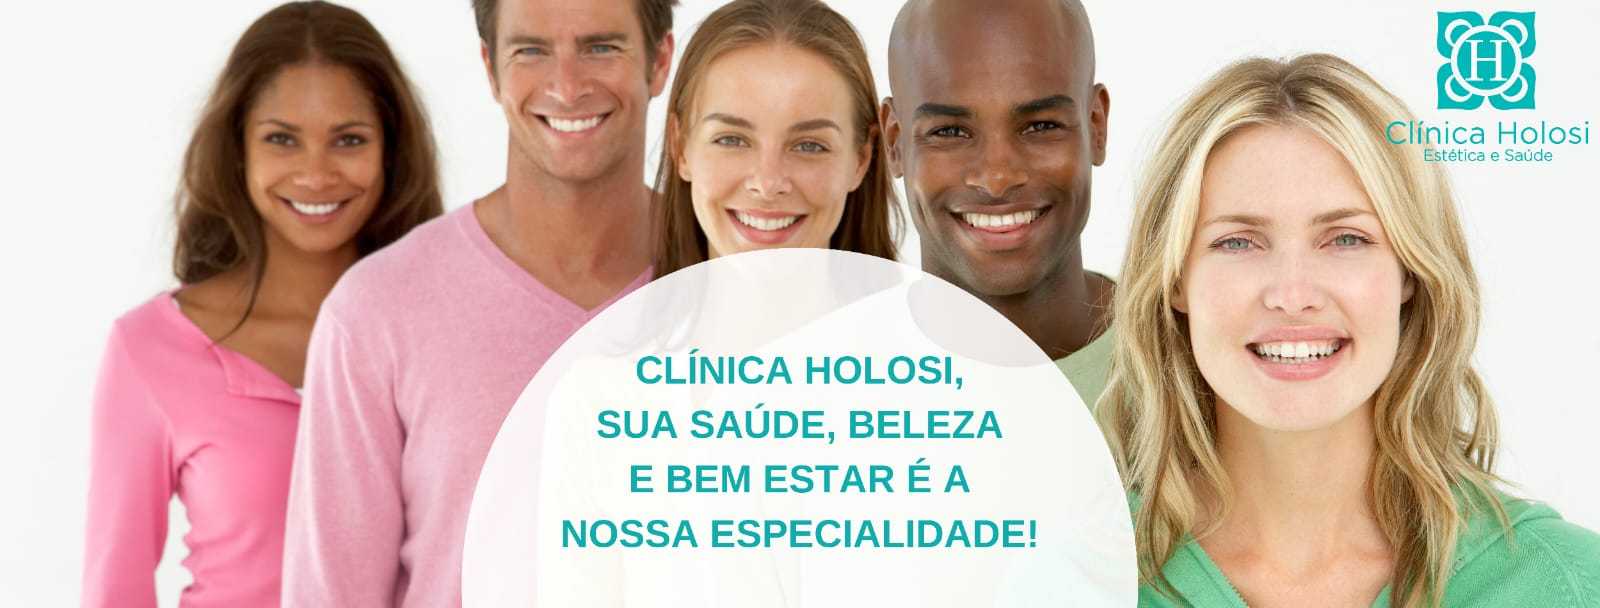 clinicaholosi-banner1